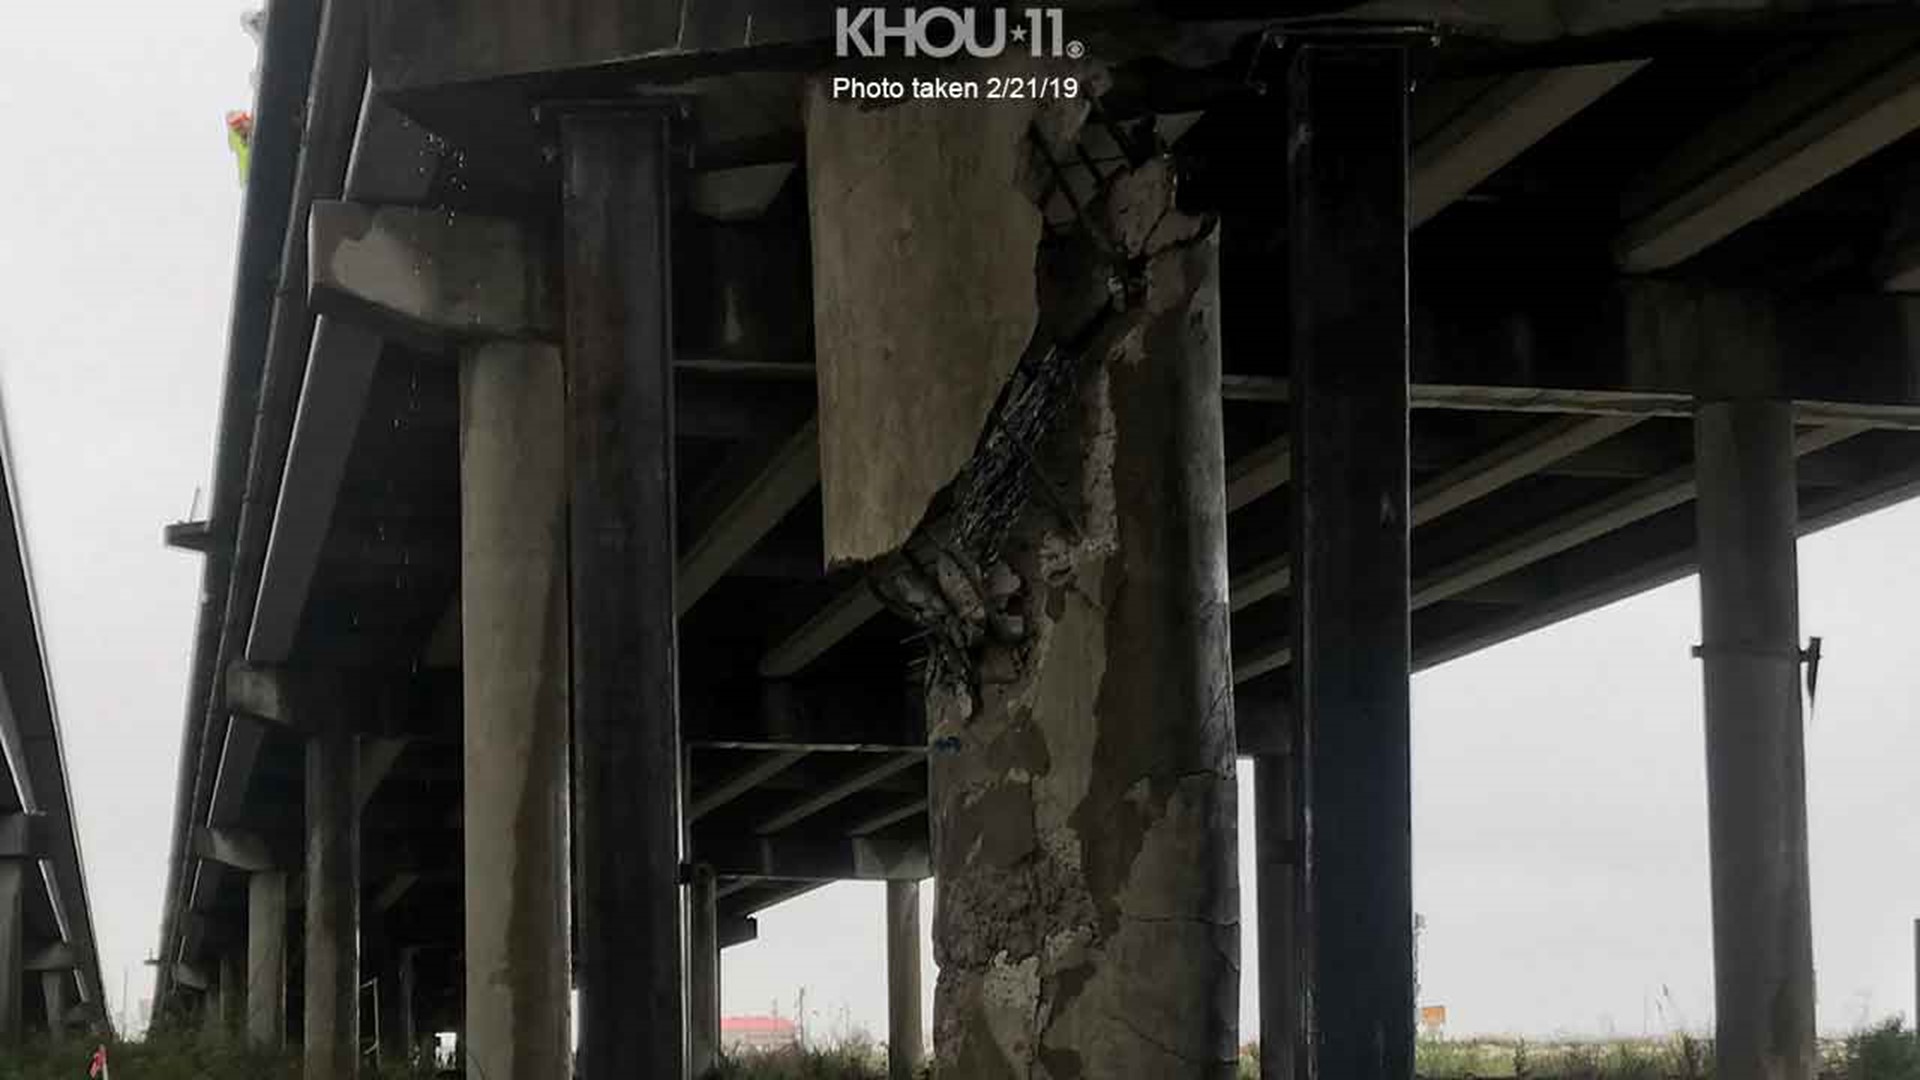 Raw video of the crack in the support beam on the I-10 East bridge over the San Jacinto River. This video was taken on February 21, 2019.